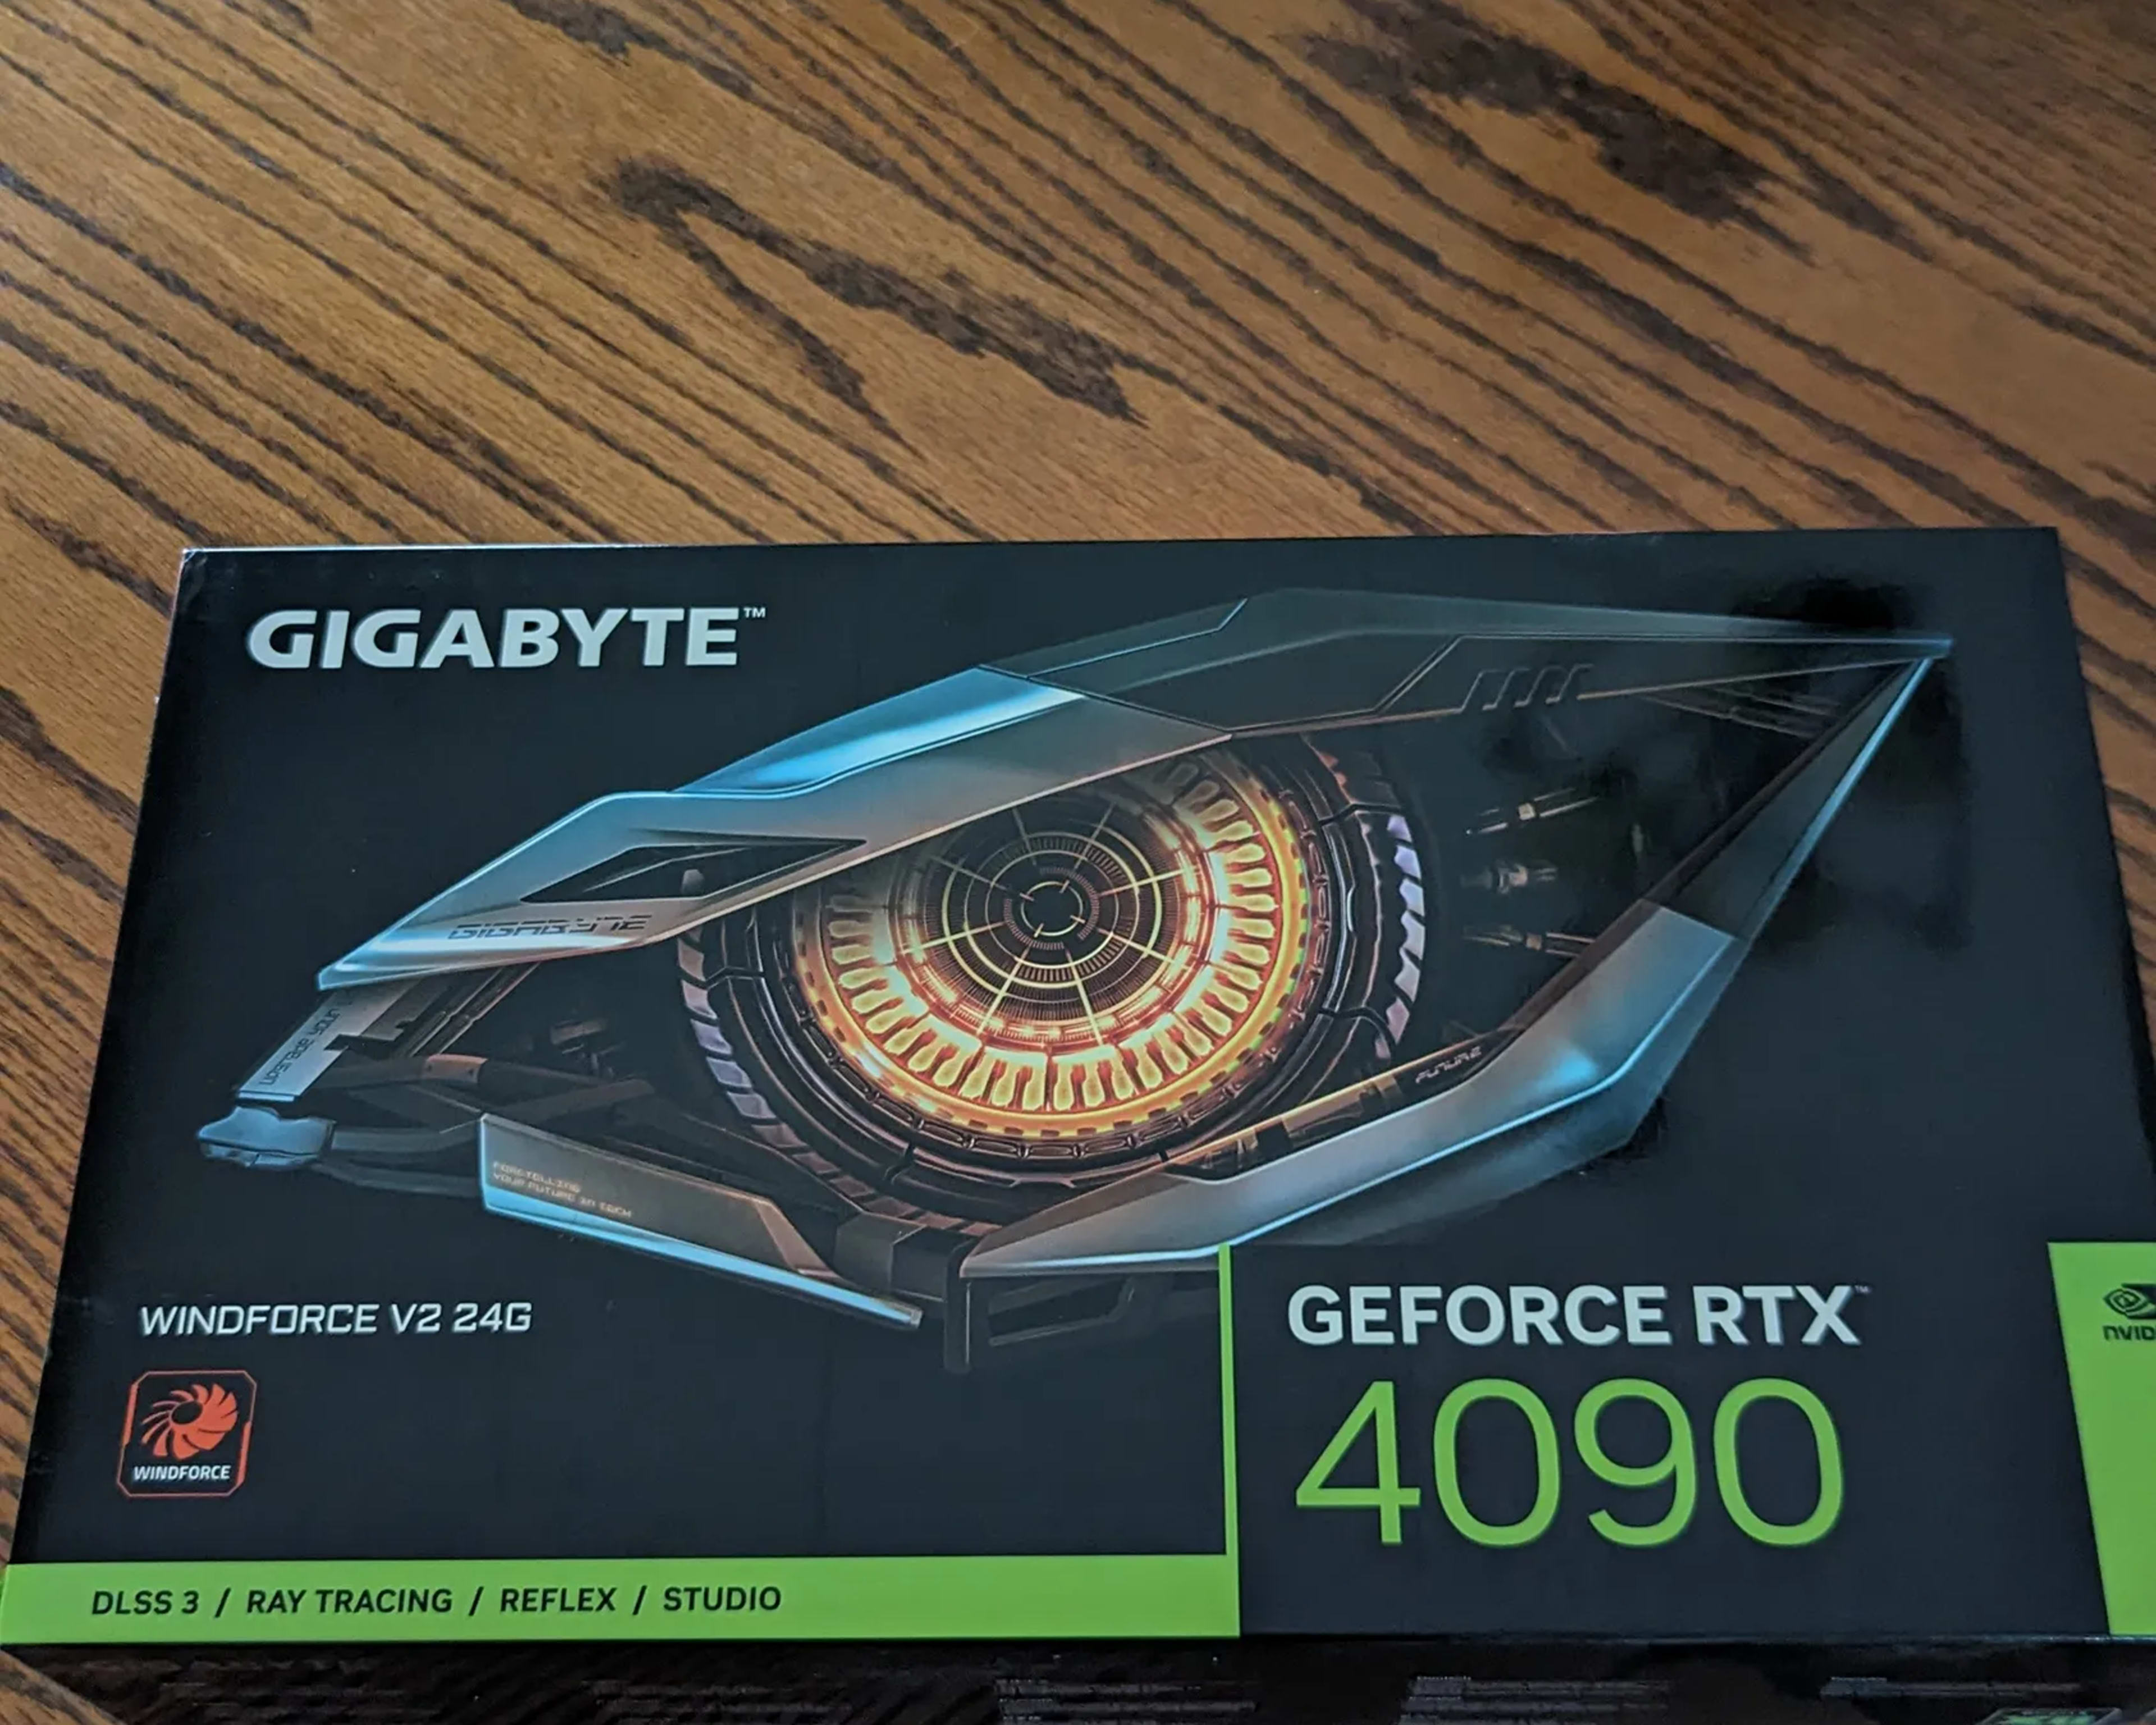 GIGABYTE GeForce RTX 4090 WINDFORCE V2 and cable mod cable